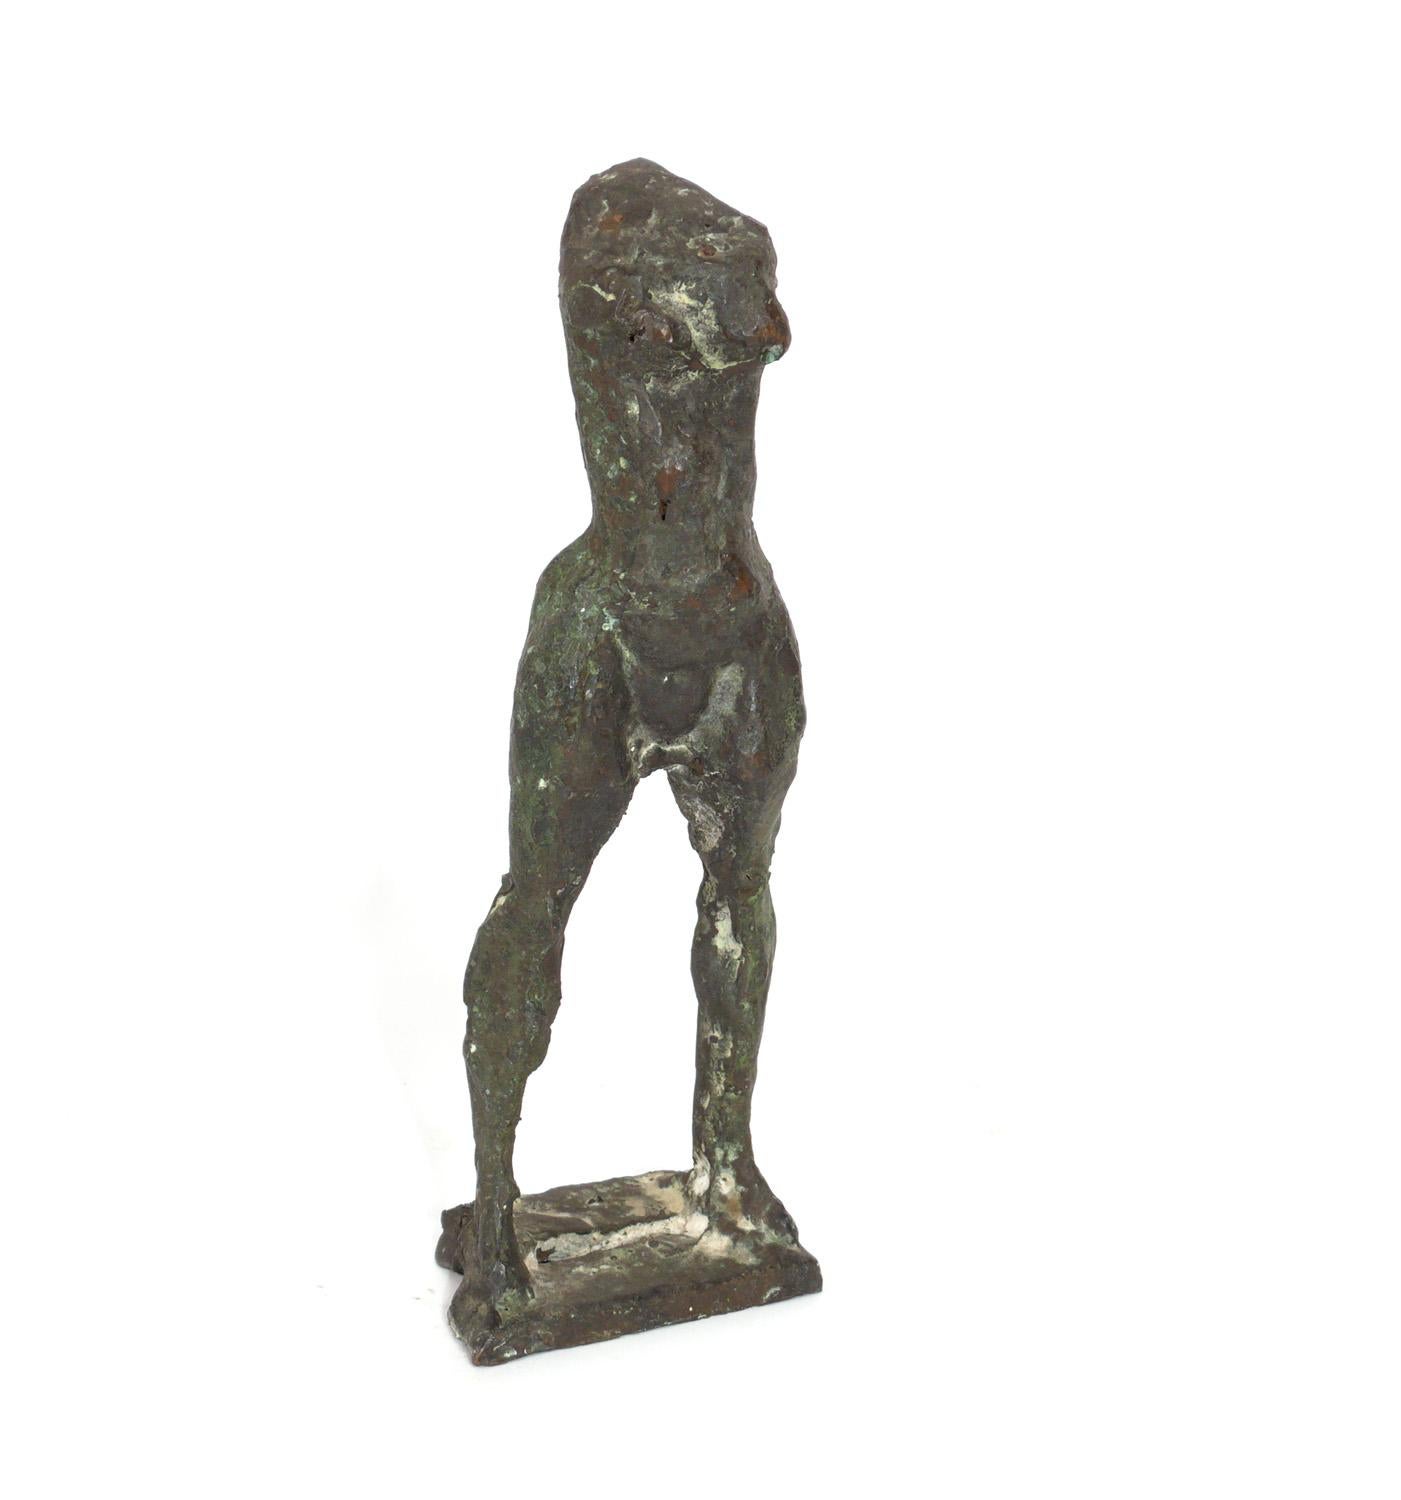 Selection of figural nude female bronzes, circa 1940s-1990s. These were removed from the Manhattan estate of a world traveler. She purchased a lot of art in Italy, including a signed Ettore Greco bronze that we also listed on 1stdibs. Only one of